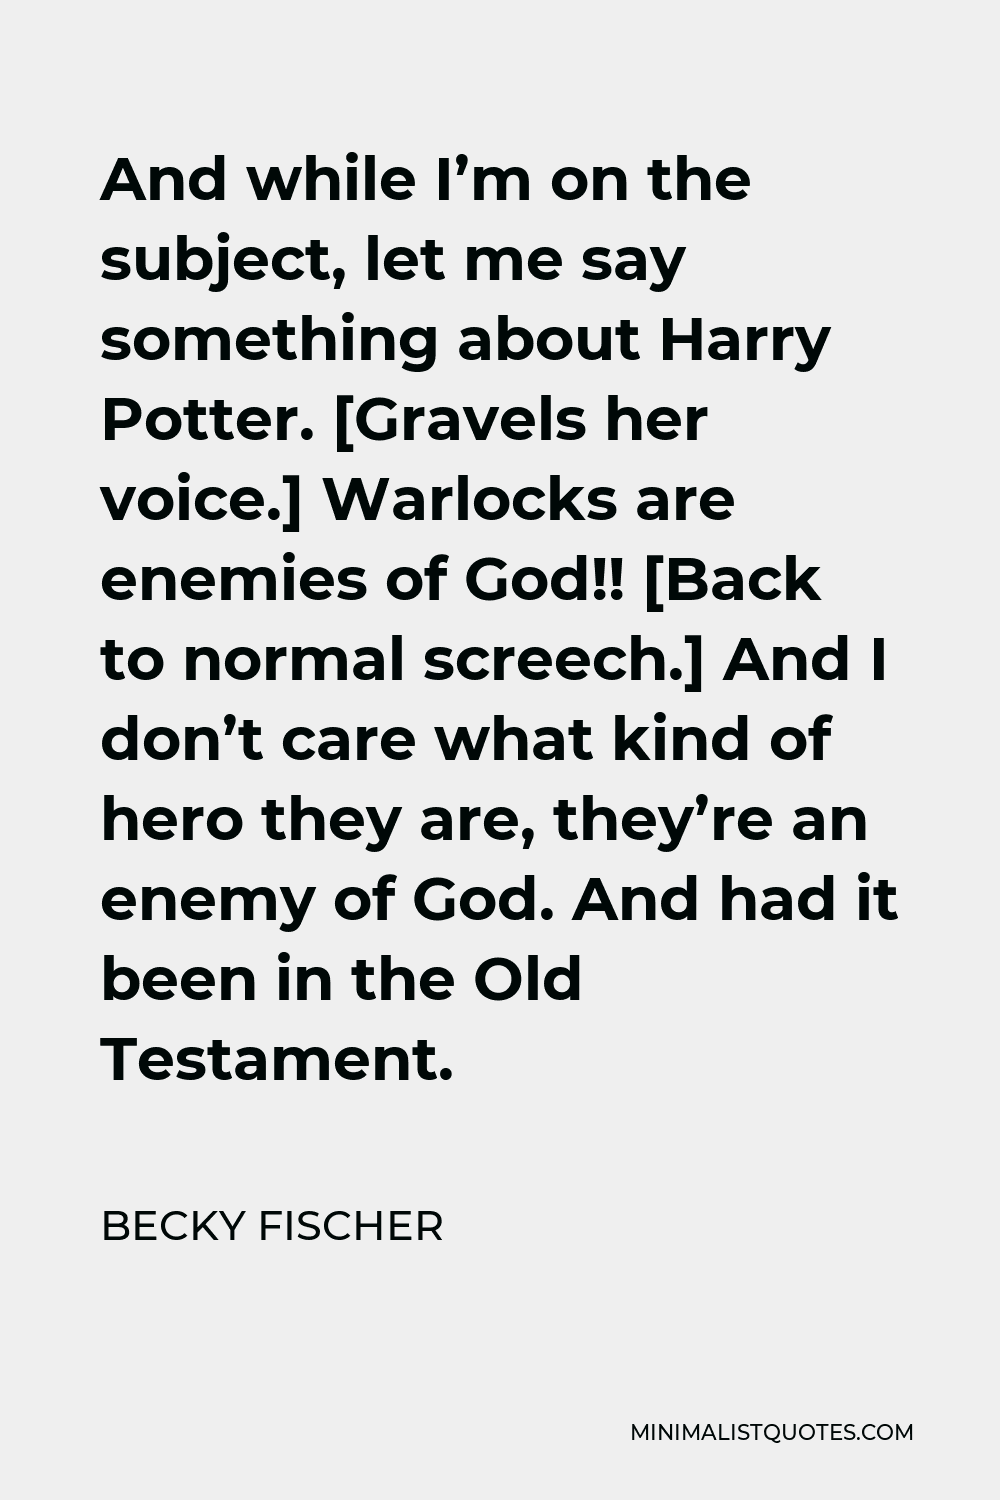 Becky Fischer Quote - And while I’m on the subject, let me say something about Harry Potter. [Gravels her voice.] Warlocks are enemies of God!! [Back to normal screech.] And I don’t care what kind of hero they are, they’re an enemy of God. And had it been in the Old Testament.